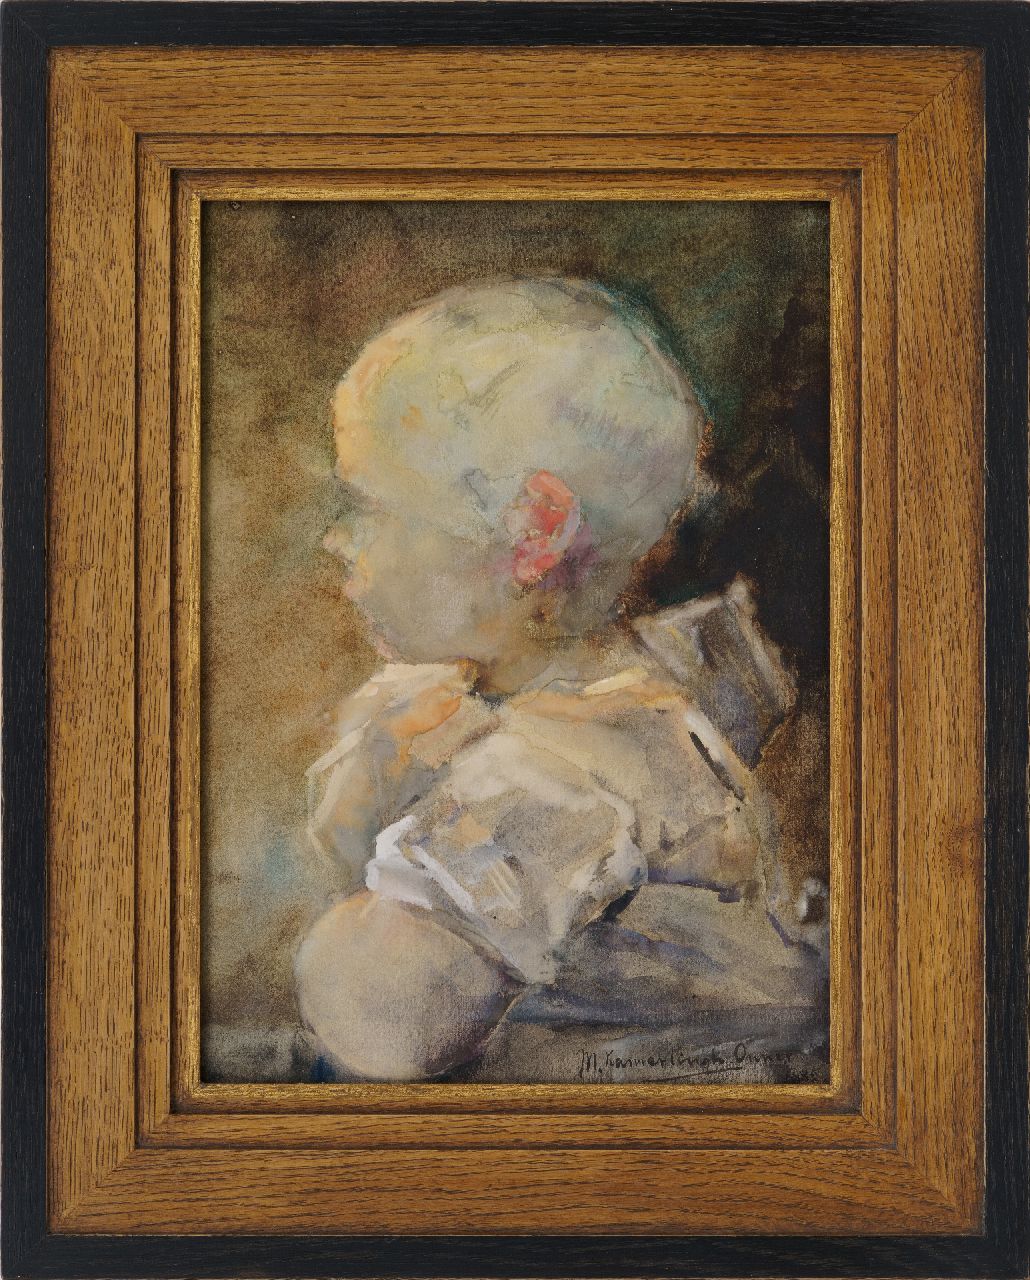 Kamerlingh Onnes M.  | Menso Kamerlingh Onnes, Portrait of a child, watercolour on paper 31.5 x 22.5 cm, signed l.r. and dated 1889